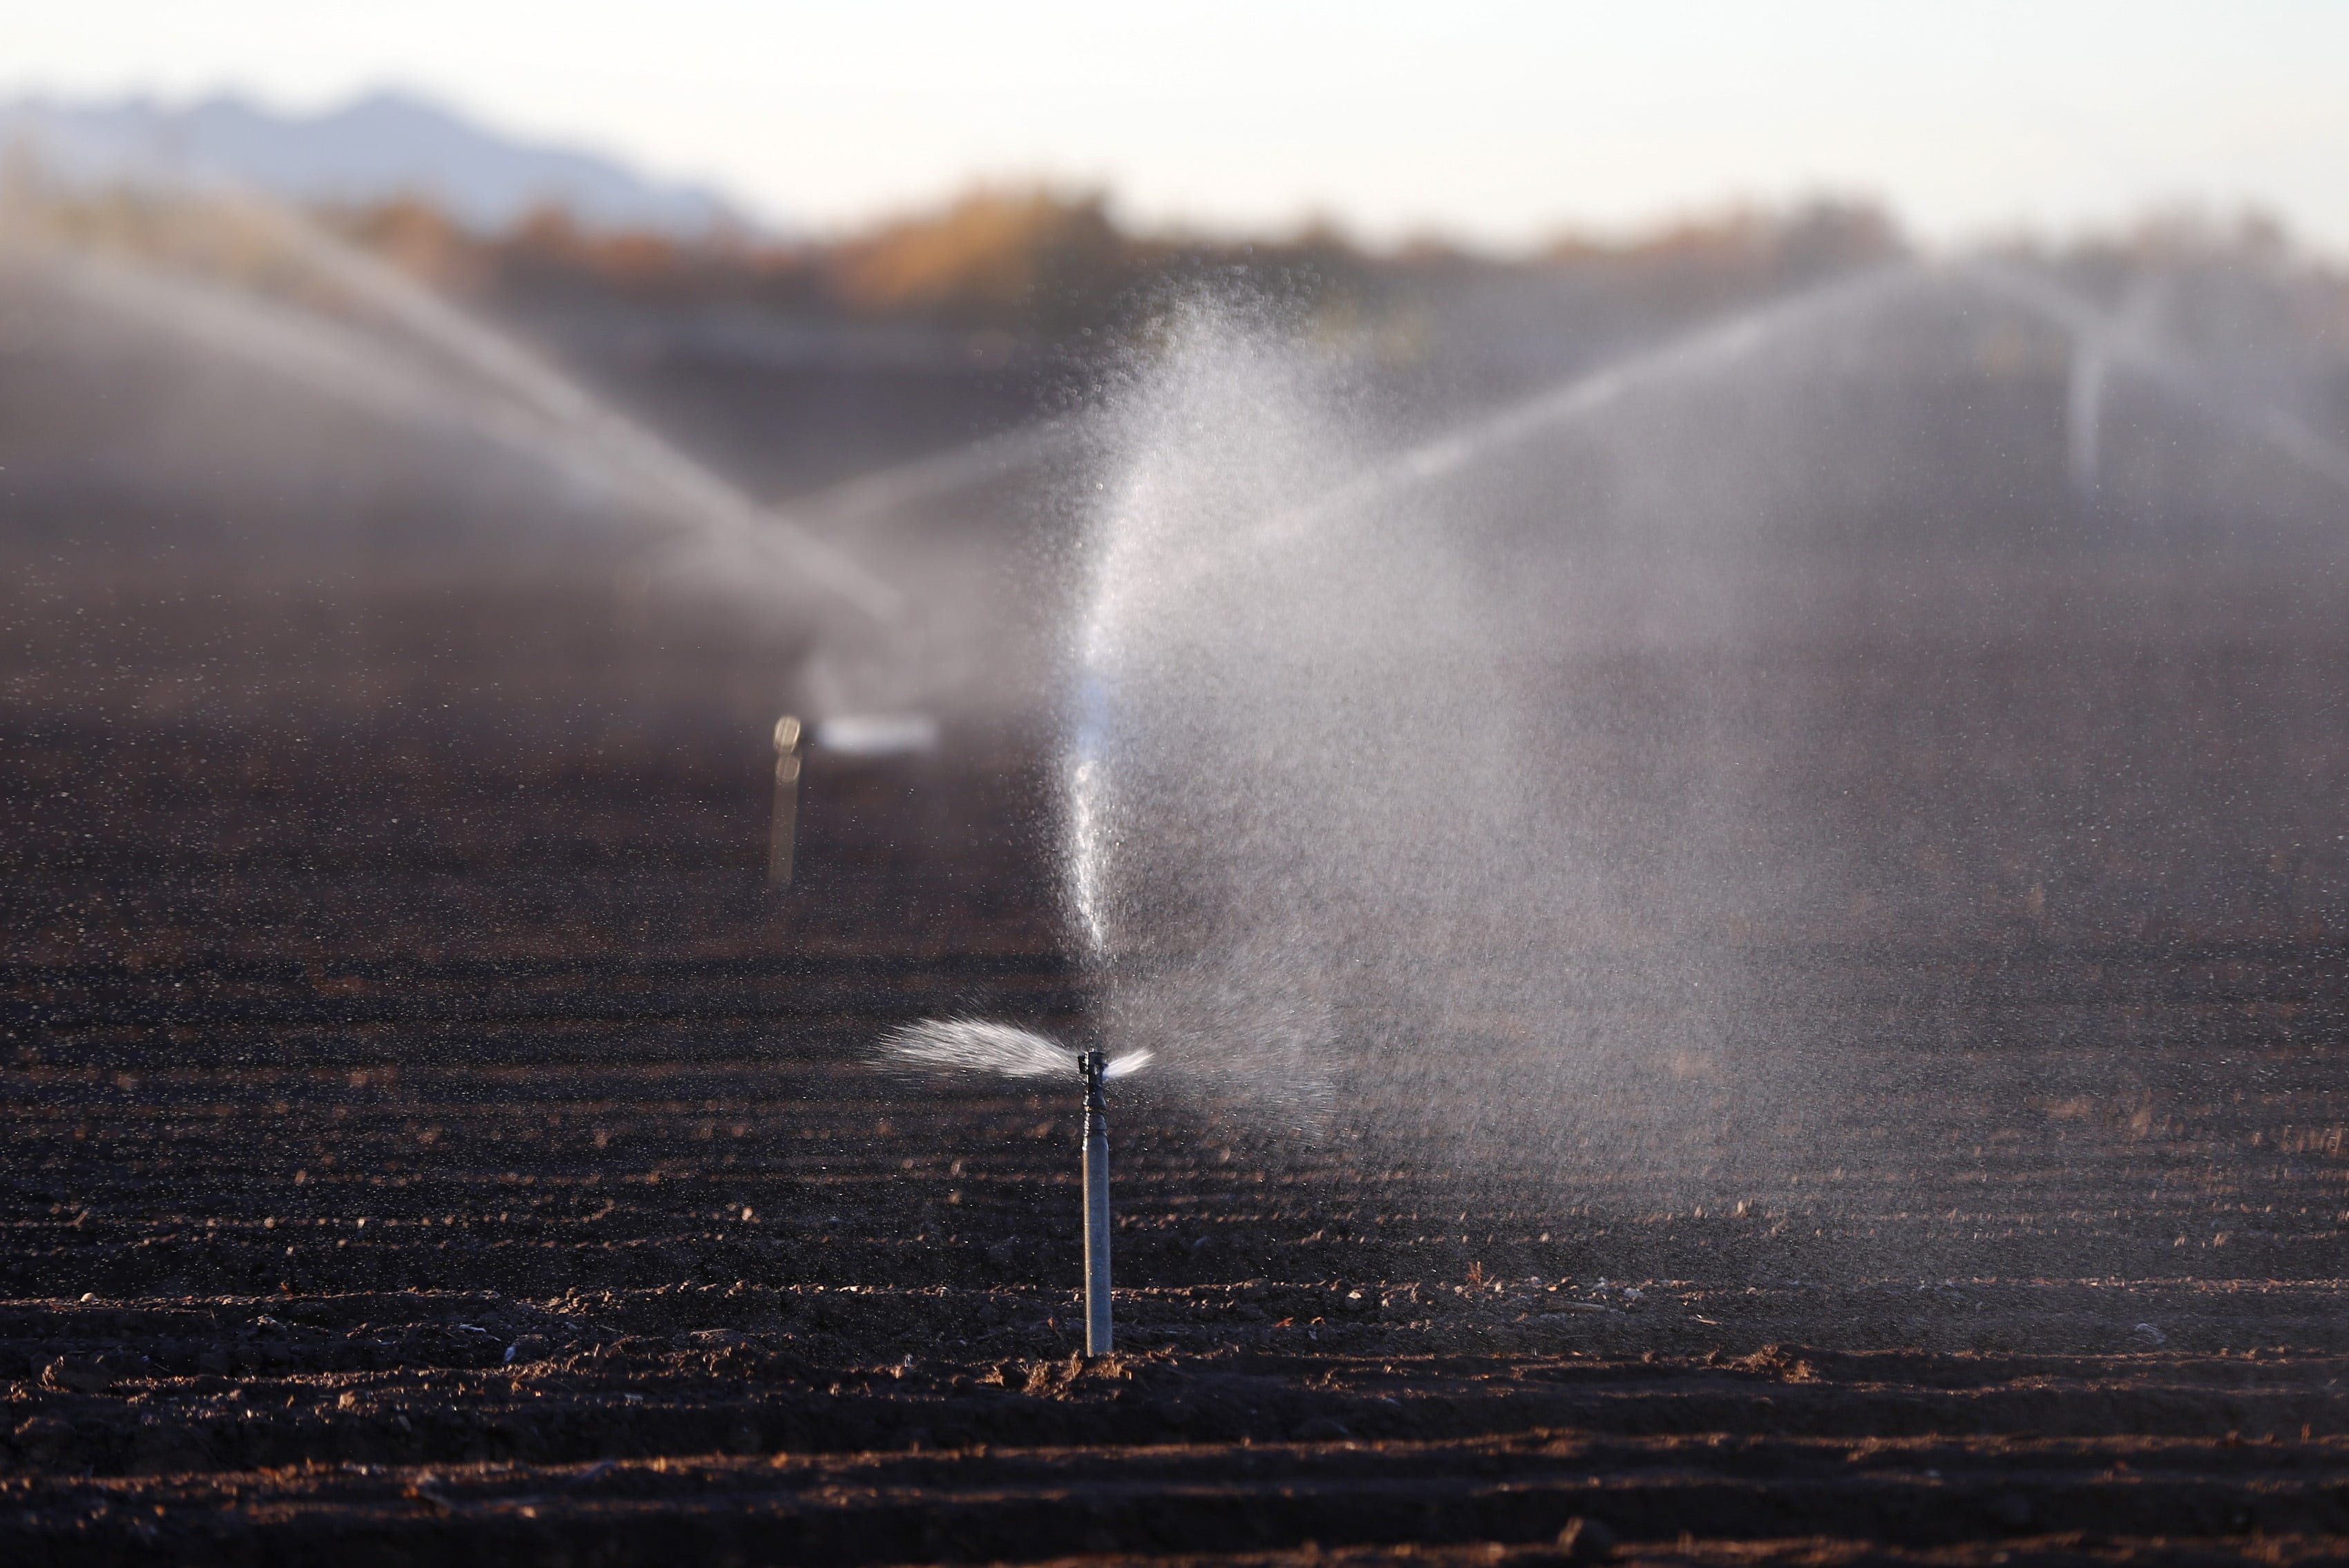 Sprinklers water a newly planted field of romaine lettuce in southwestern Arizona.